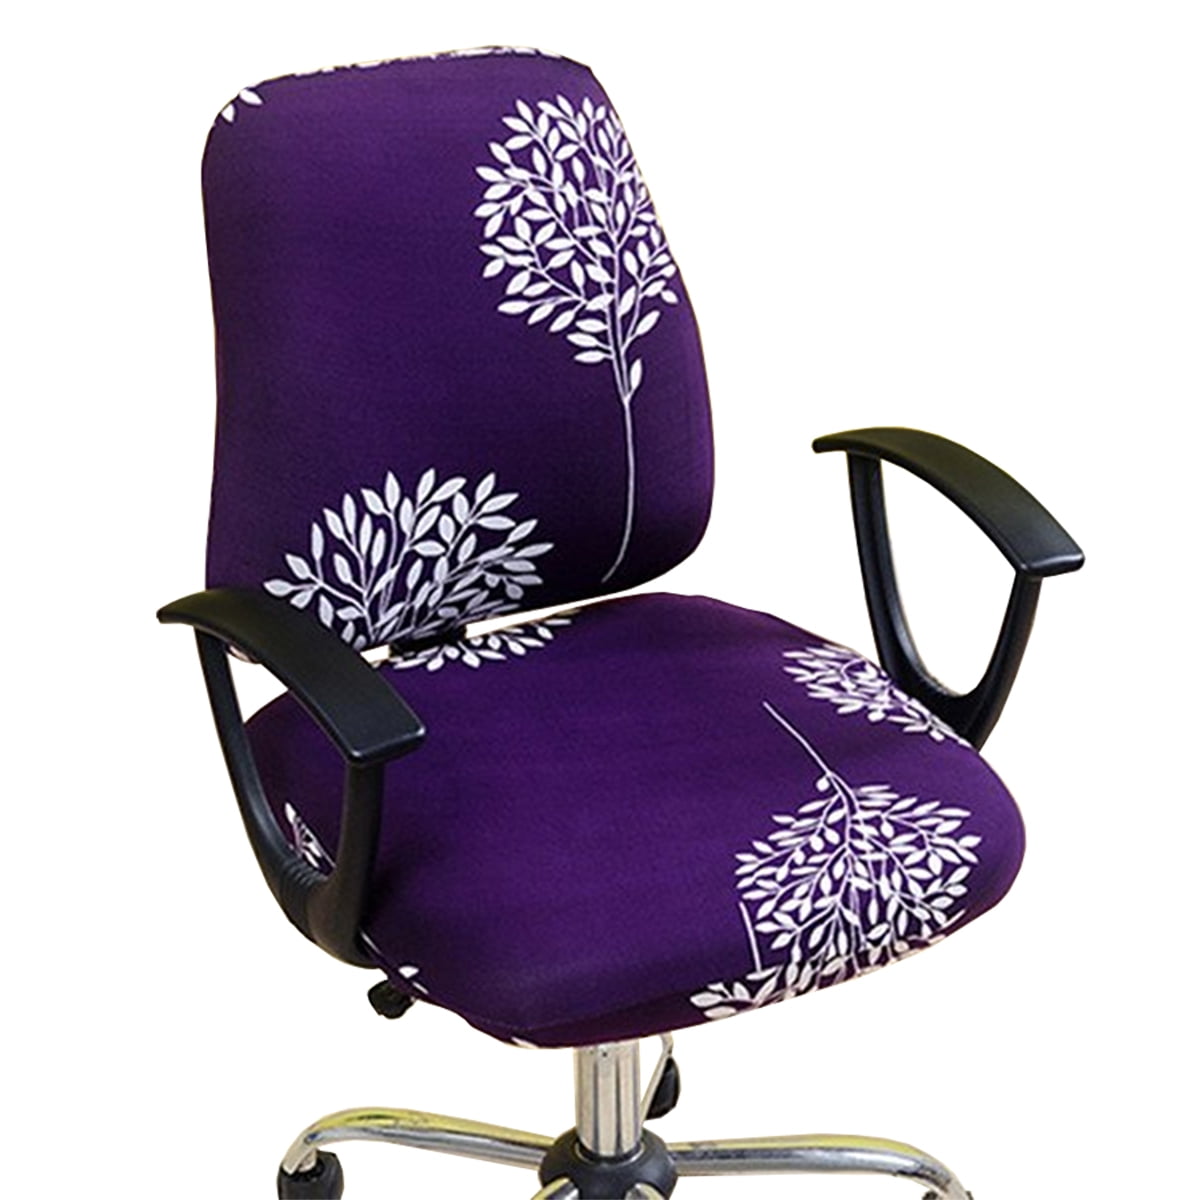 Details about   Split Computer Office Rotating Chair Cover Slipcover Stretch Seat Covers Decor 